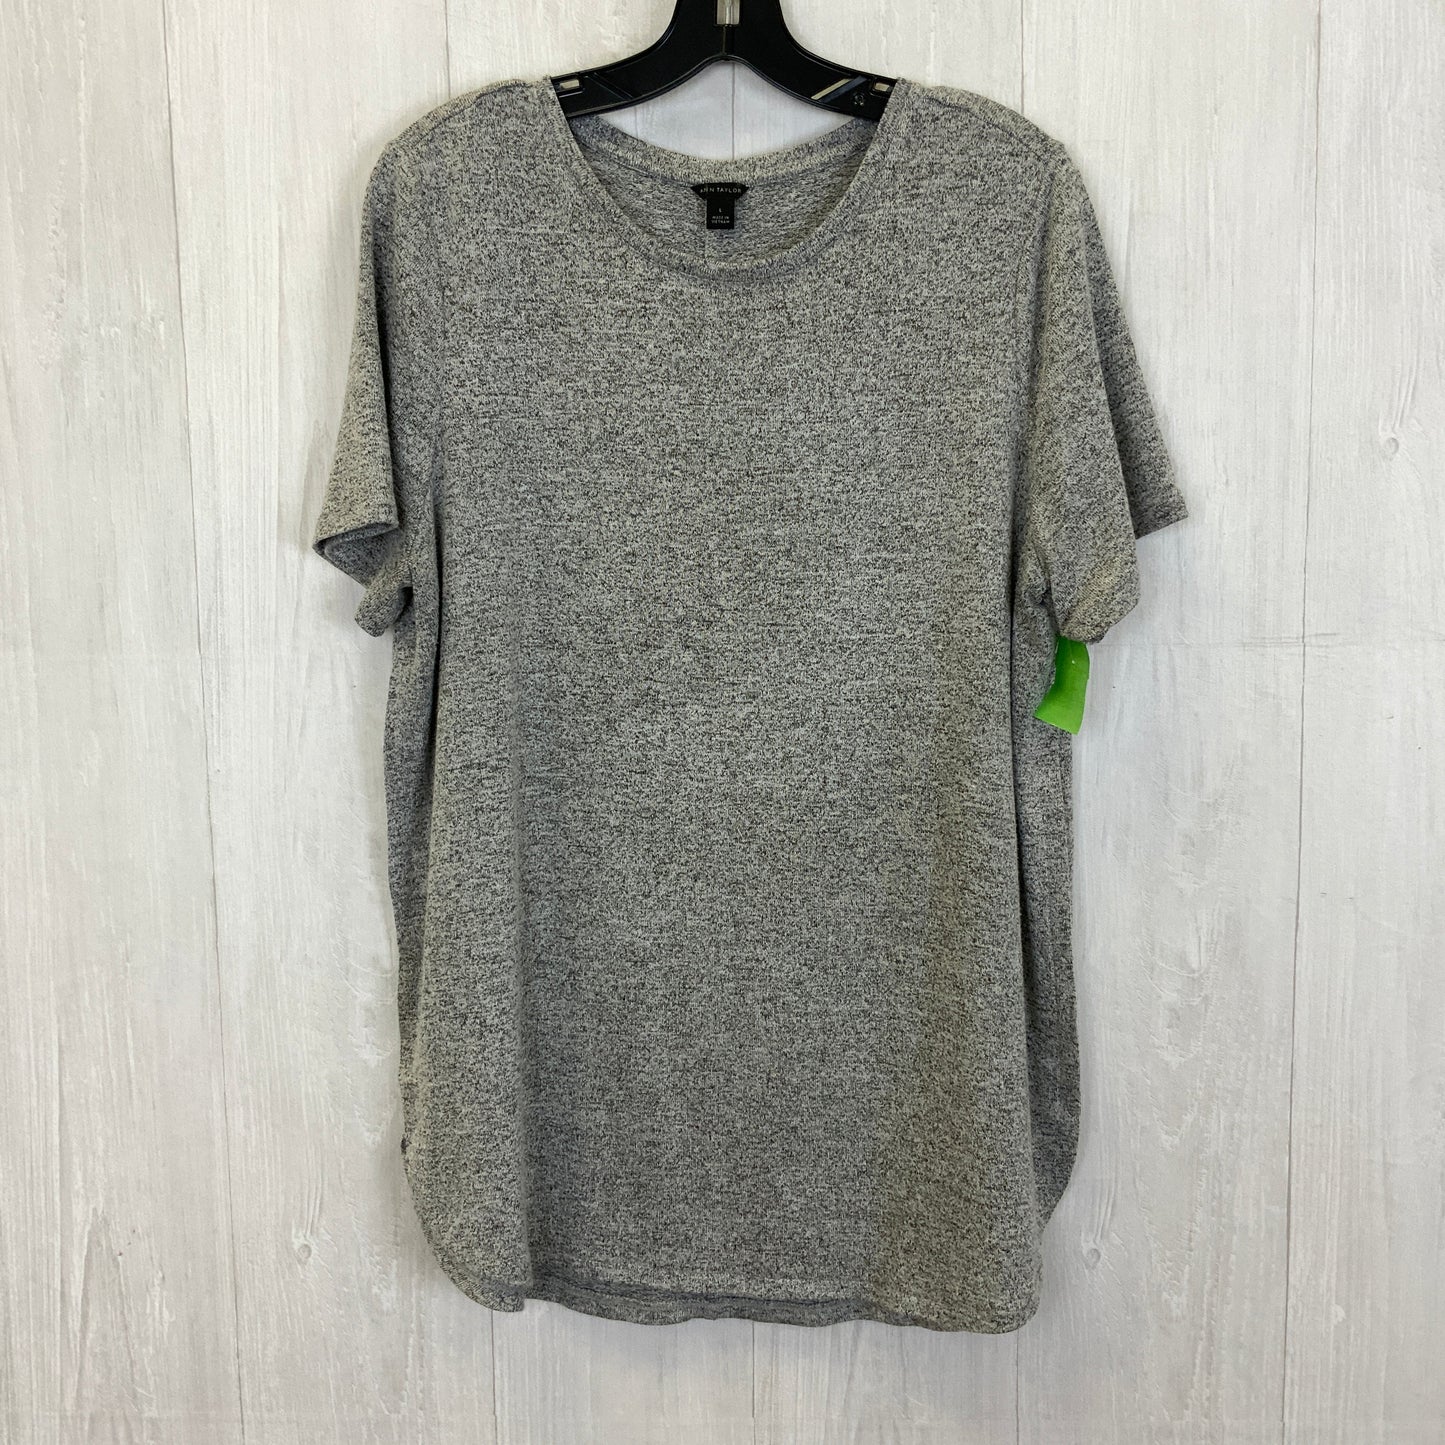 Top Short Sleeve Basic By Ann Taylor  Size: L